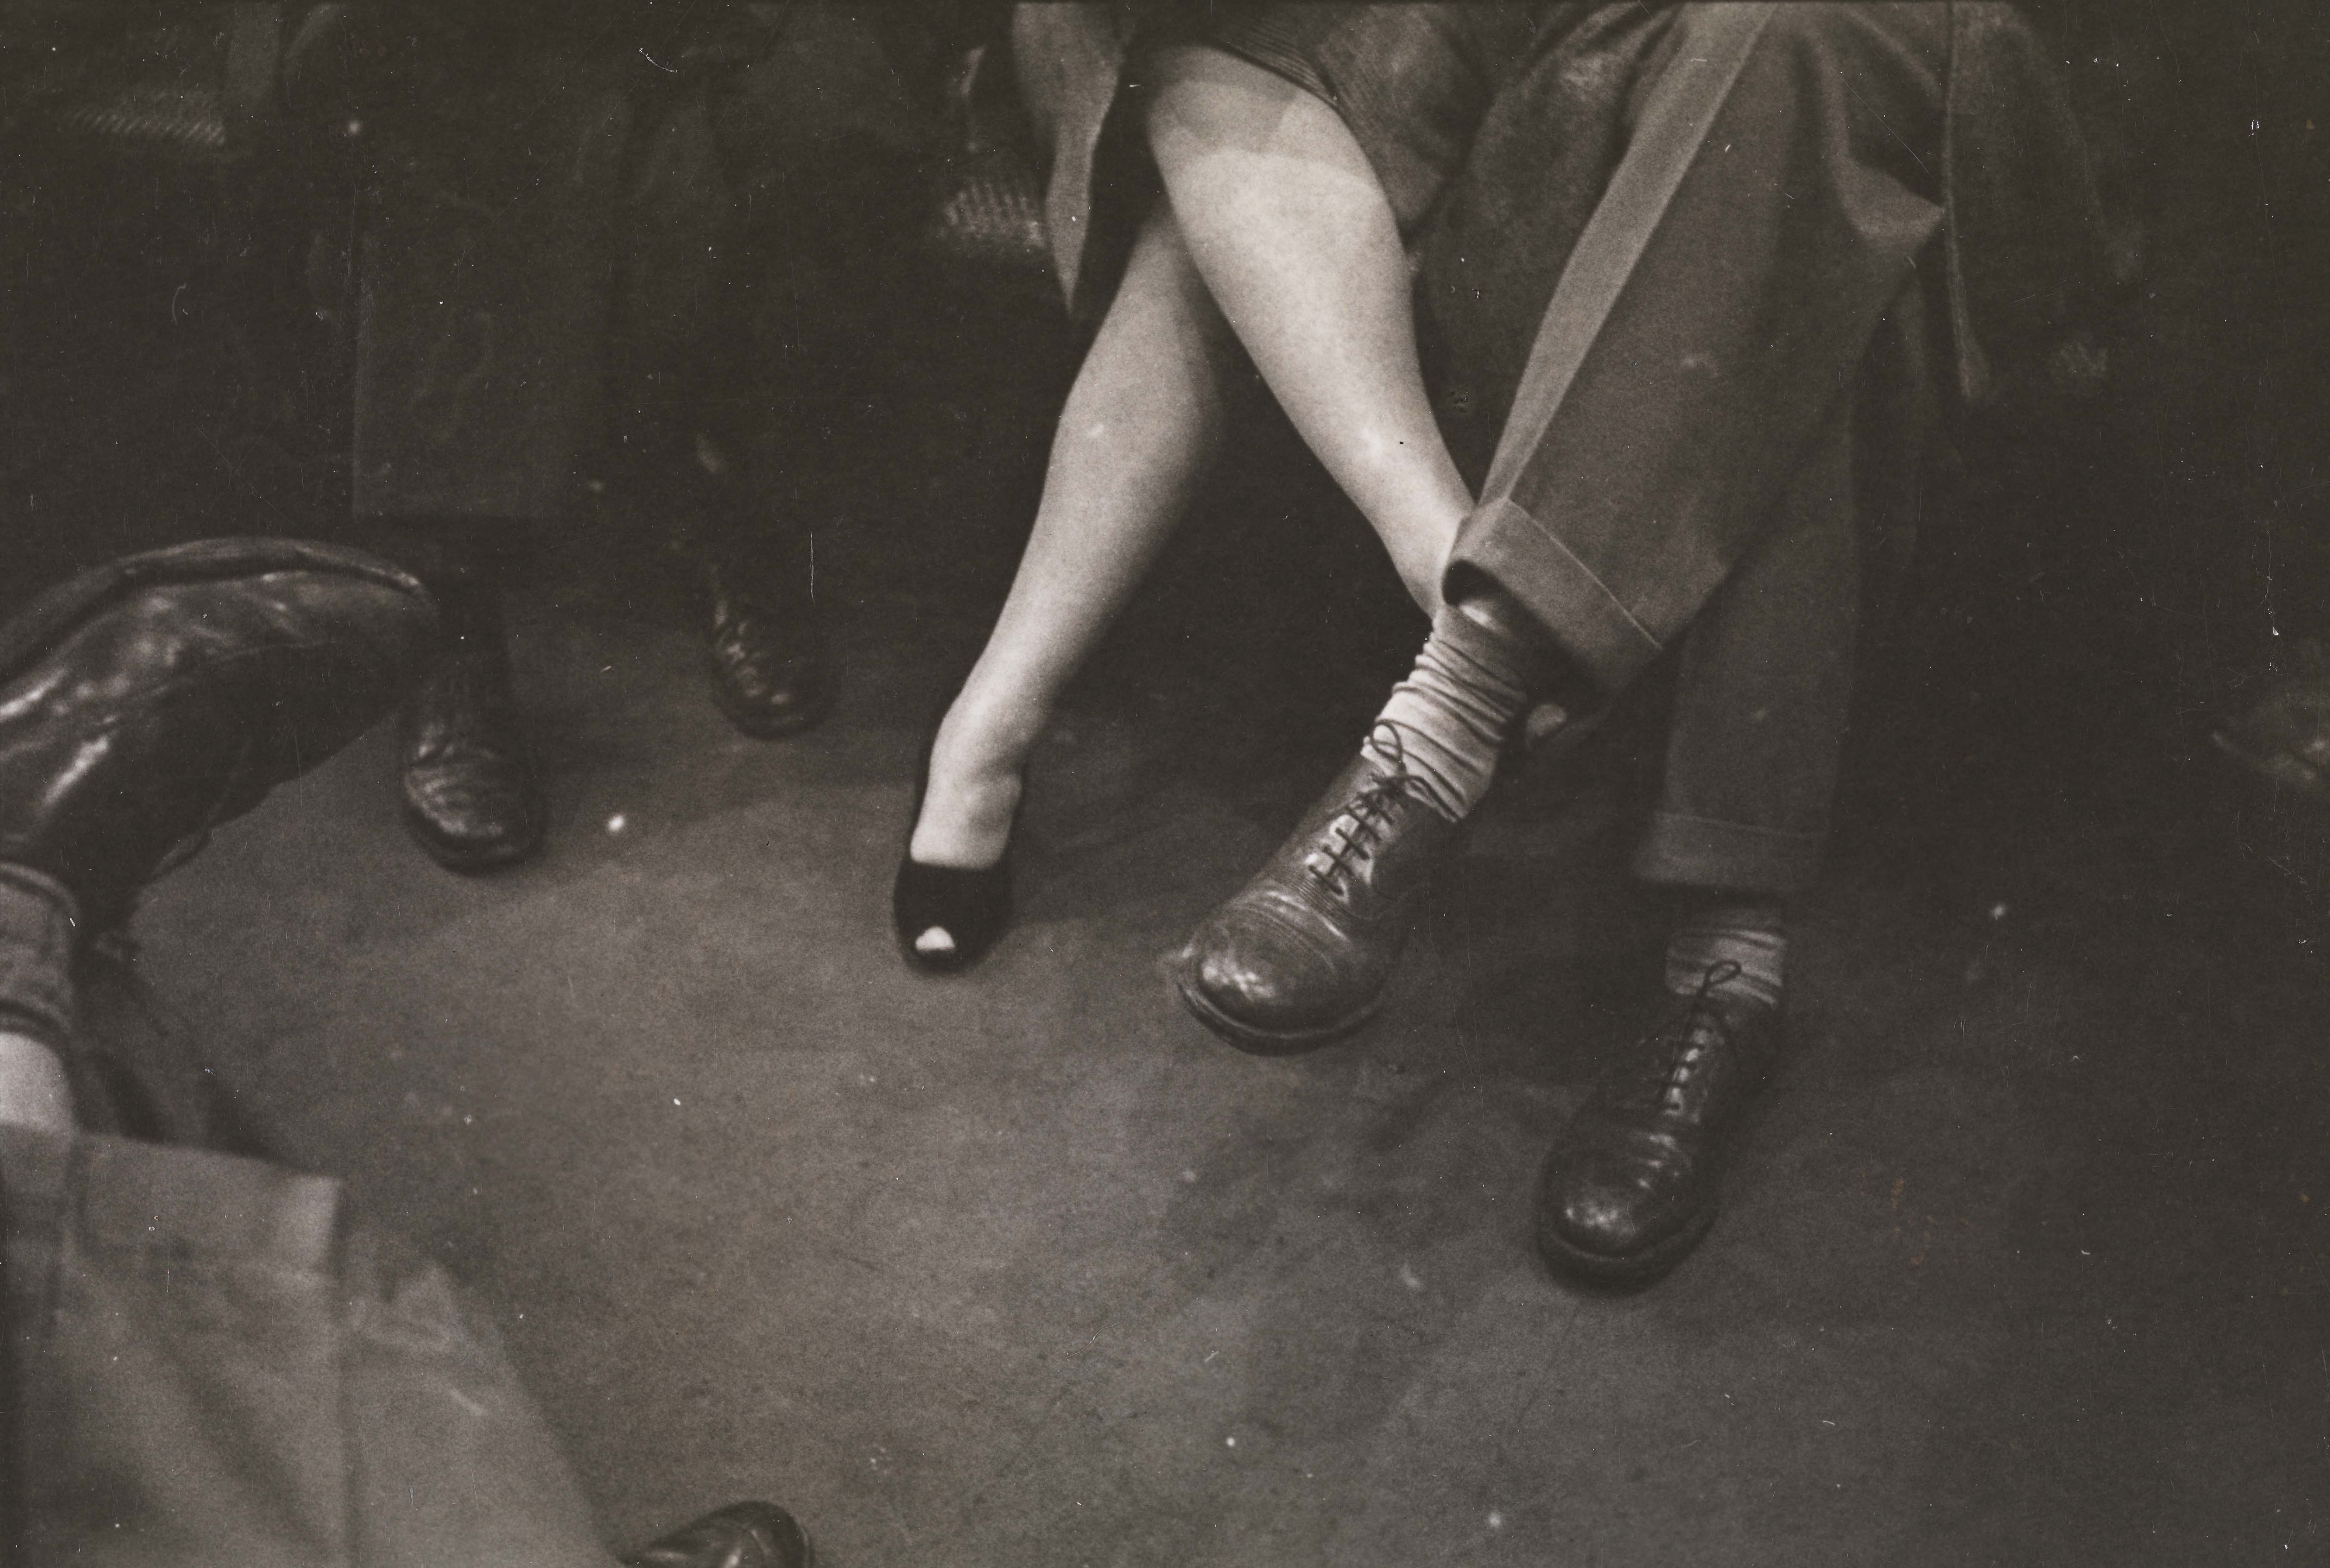 Stanley Kubrick. Life and Love on the New York City Subway. Couple playing footsies on a subway. 1946. Museum of the City of New York. X2011.4.10292.90E